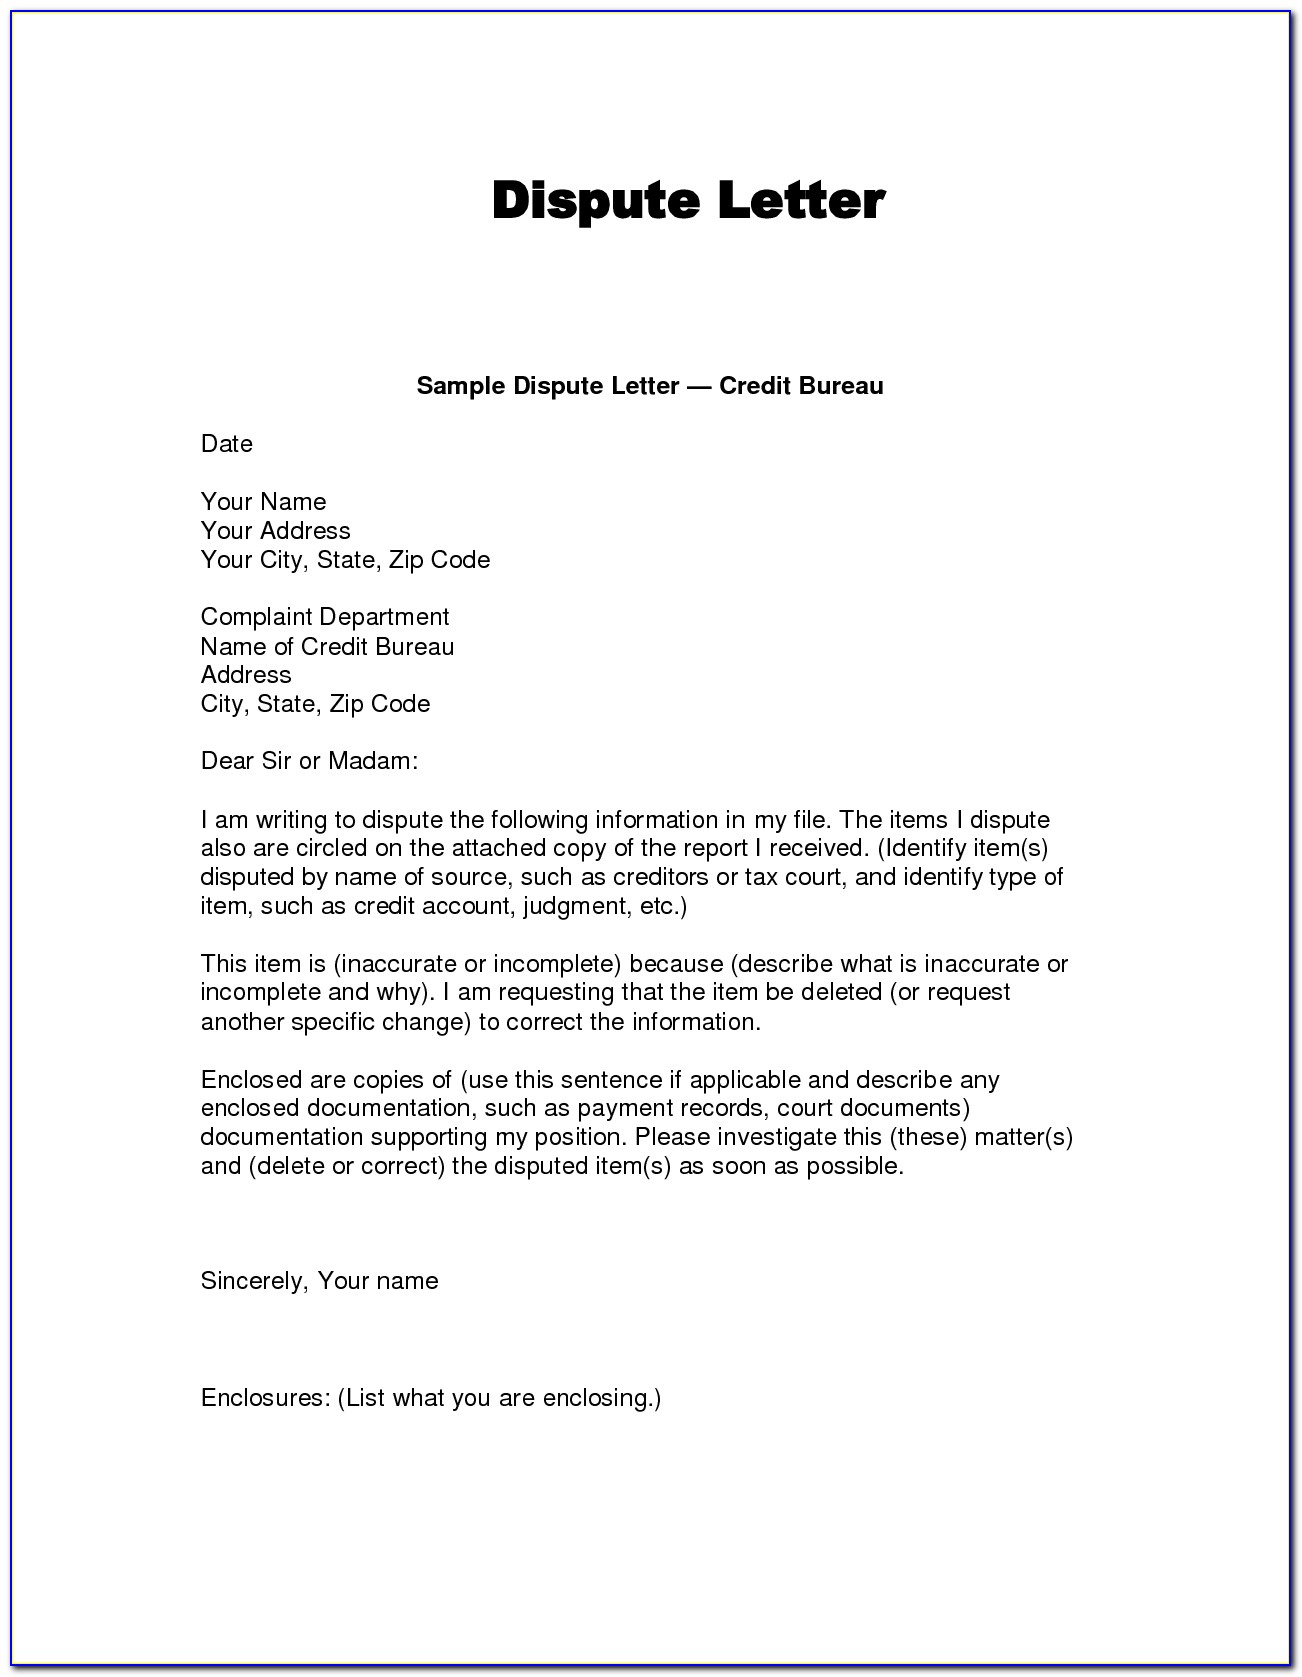 609 Dispute Letters For Free